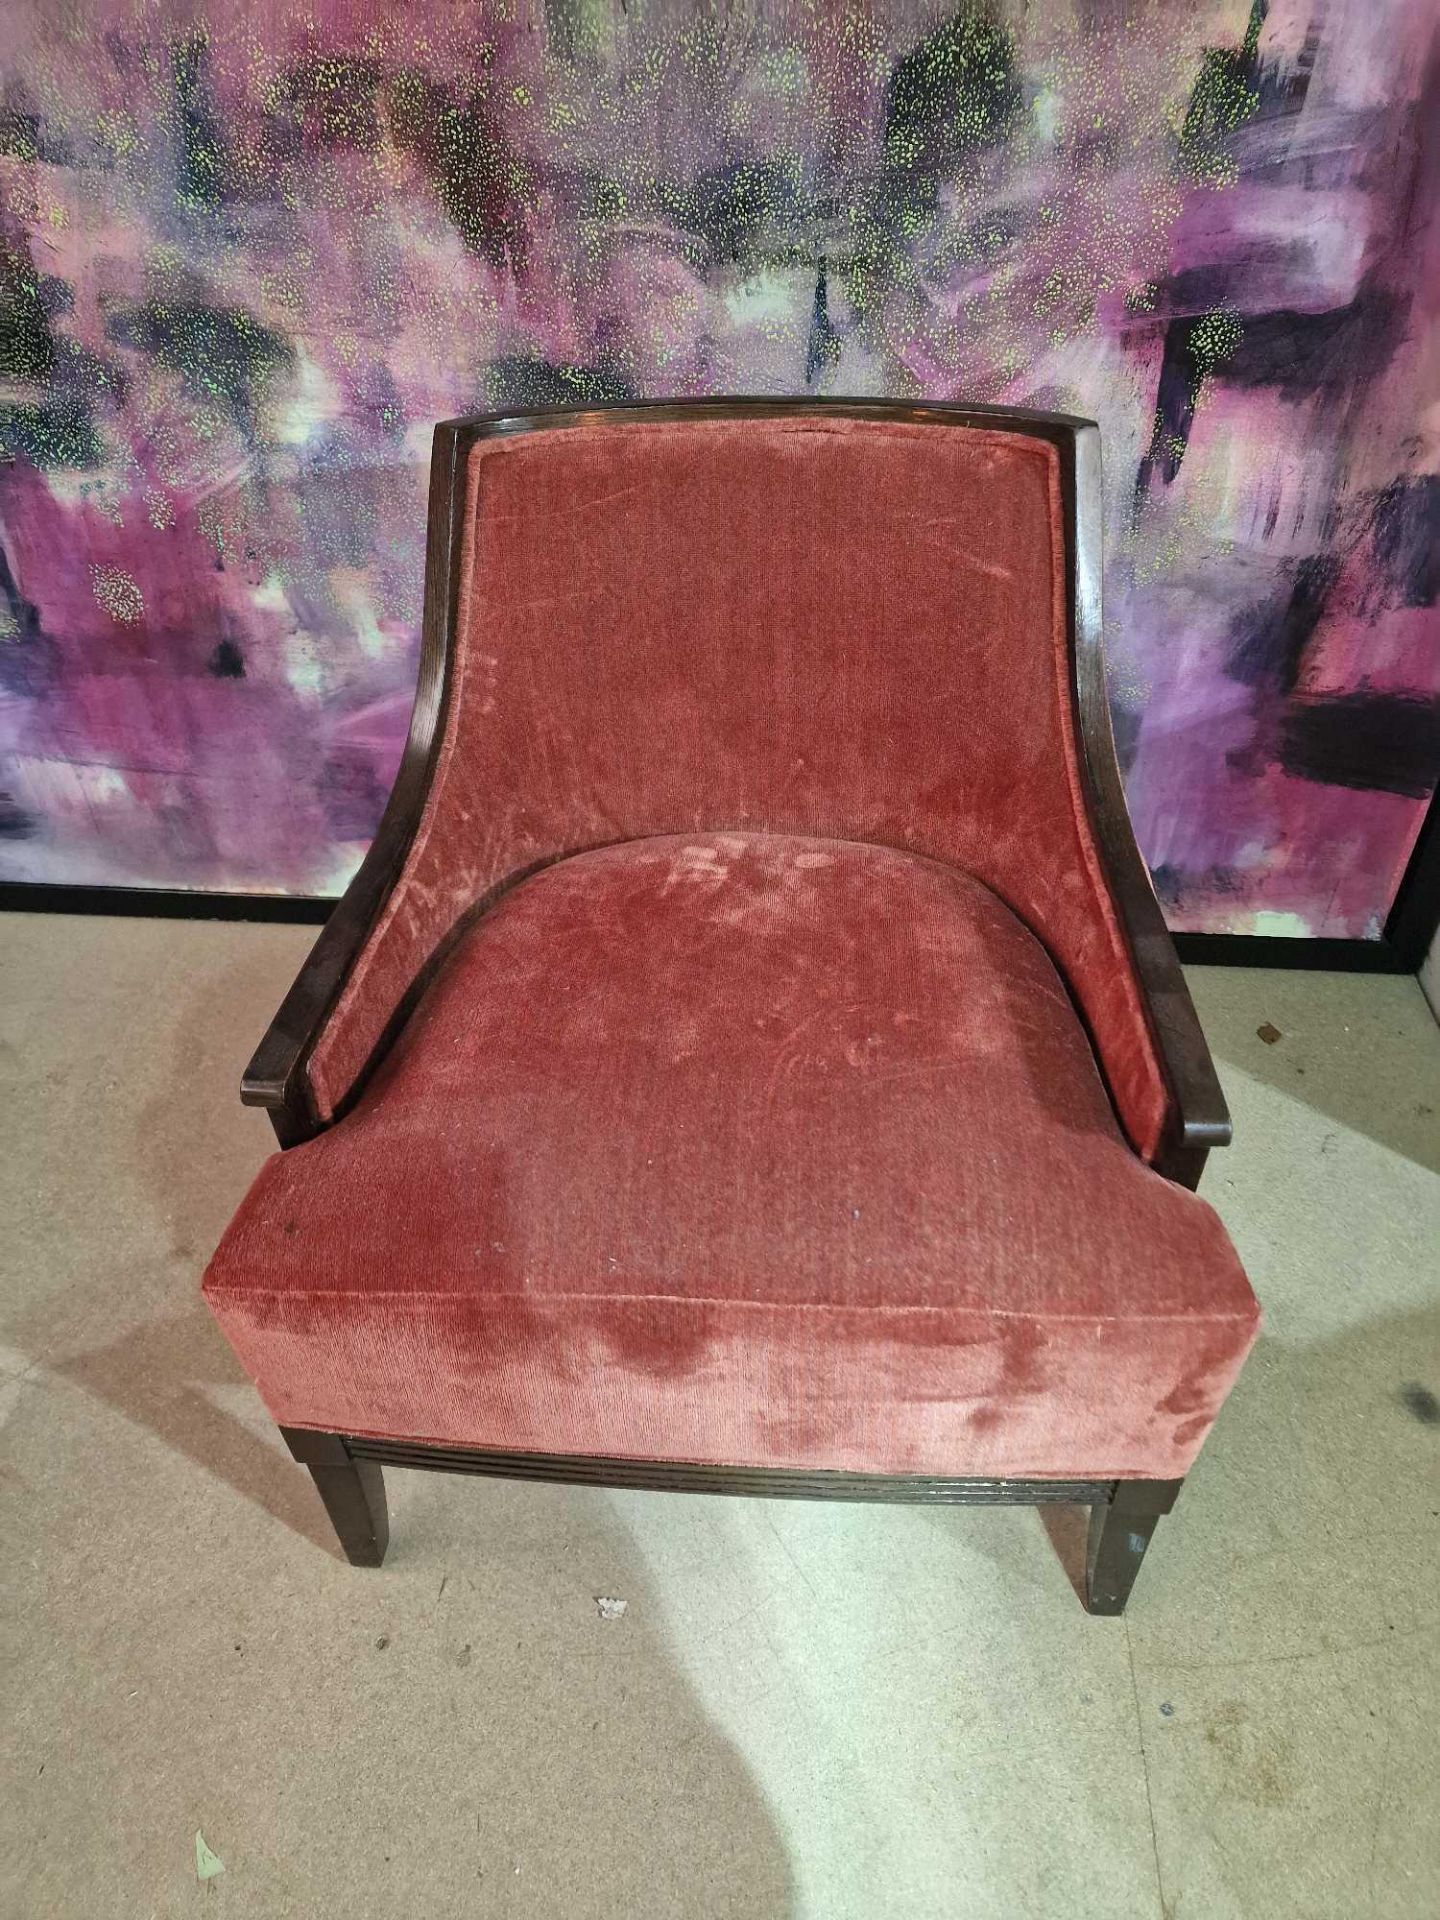 Accent chair the wooden framed stunning chair upholstered in a dark pink/red velvet to the seat